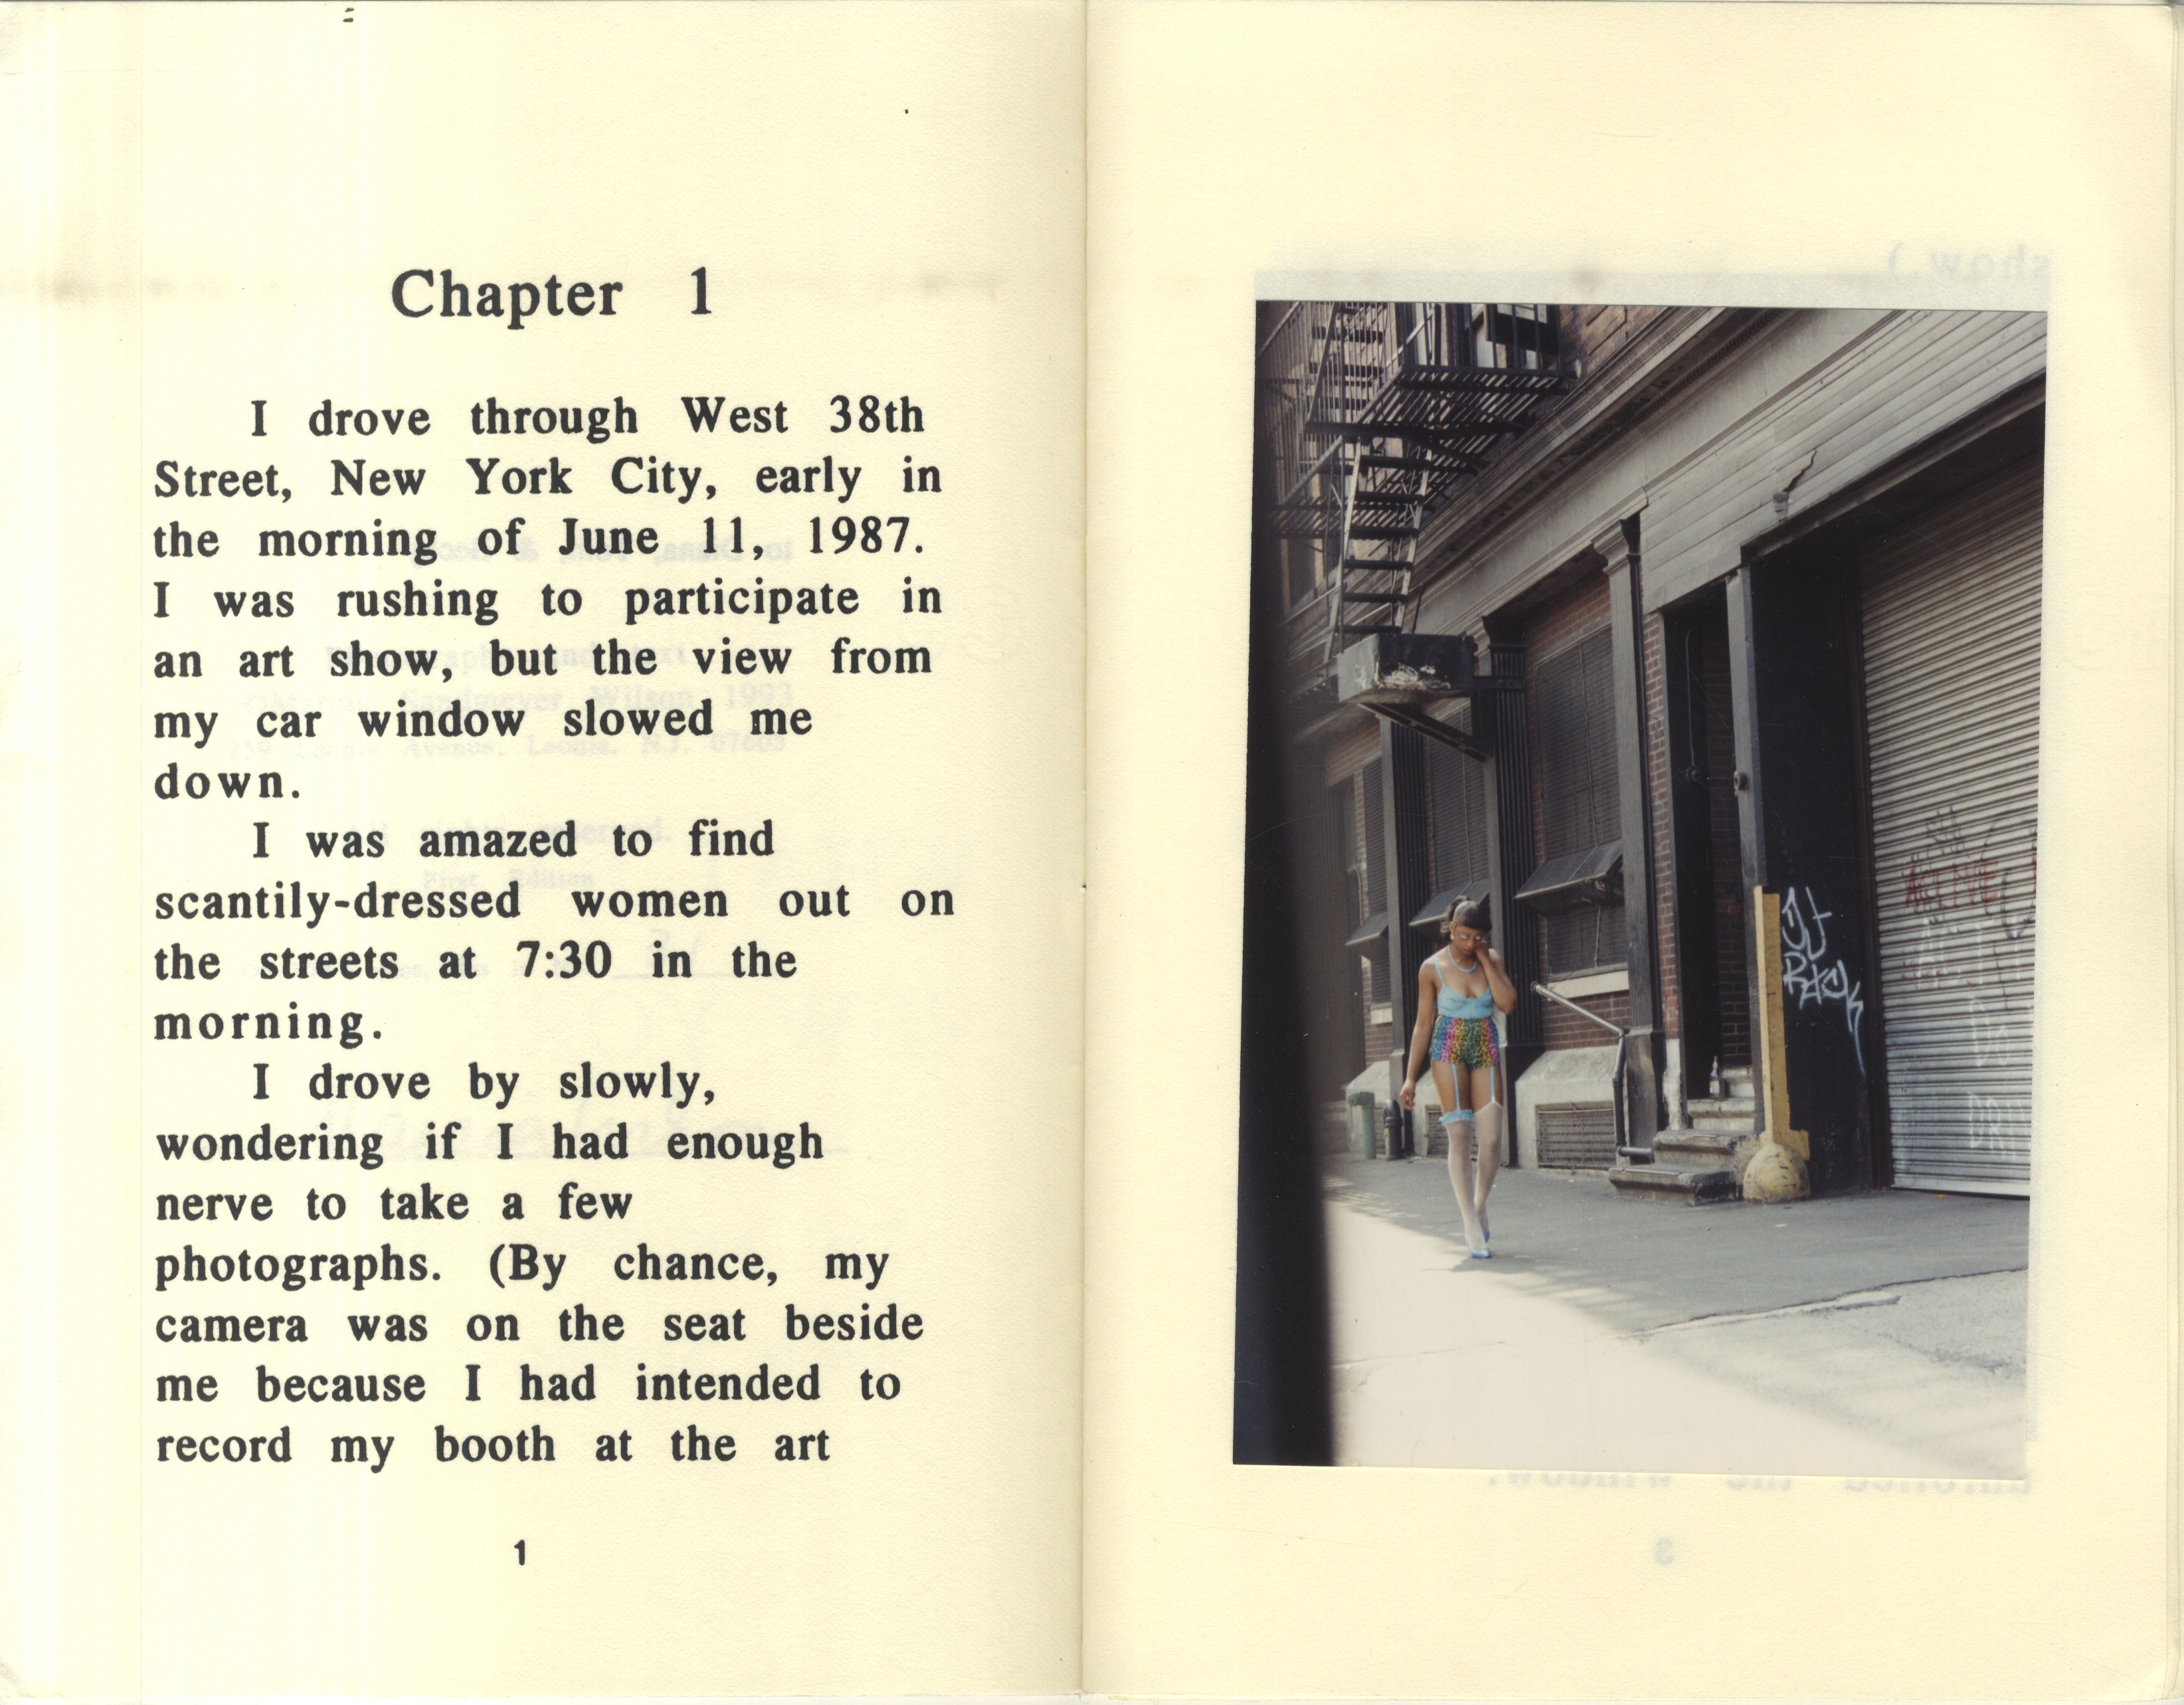 Pages from What I saw in New York City by Marcia Sandmeyer Wilson